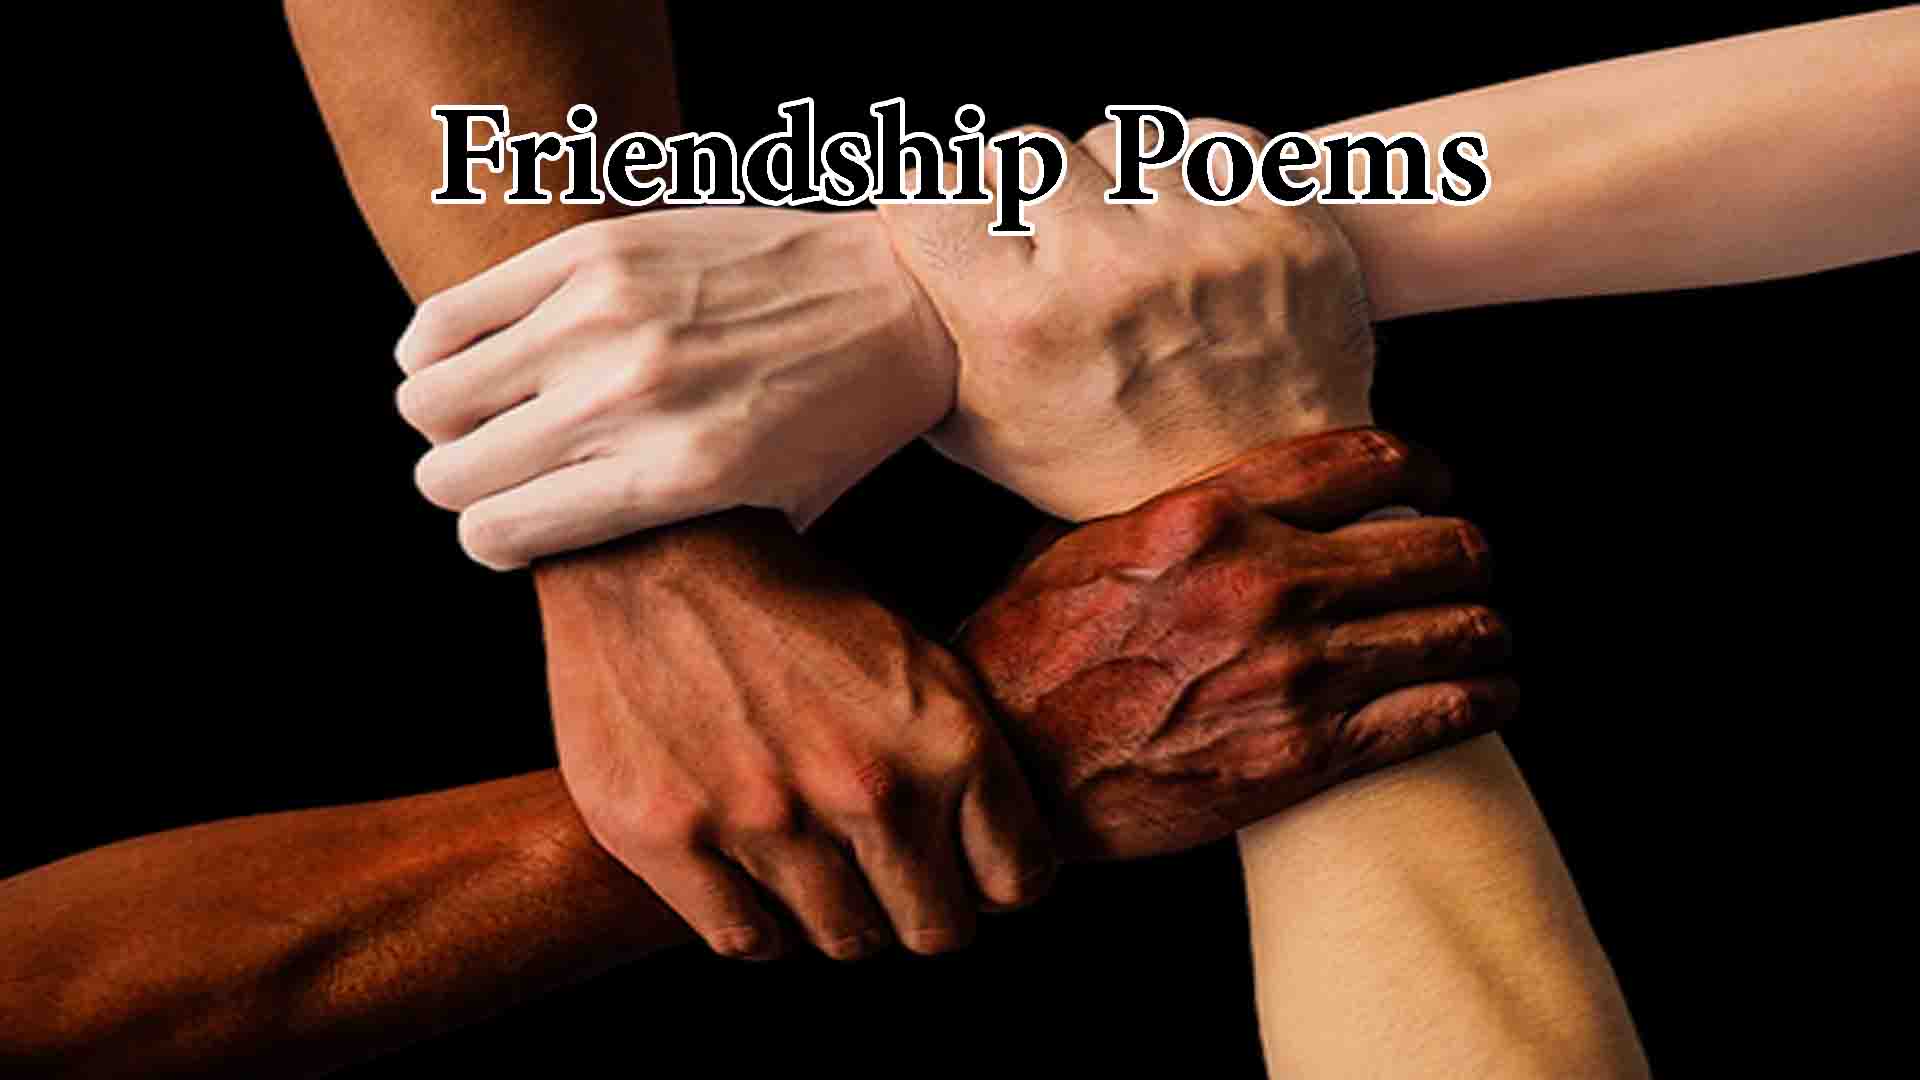 Friendship Poems | Poems About Friendship Turning into Love